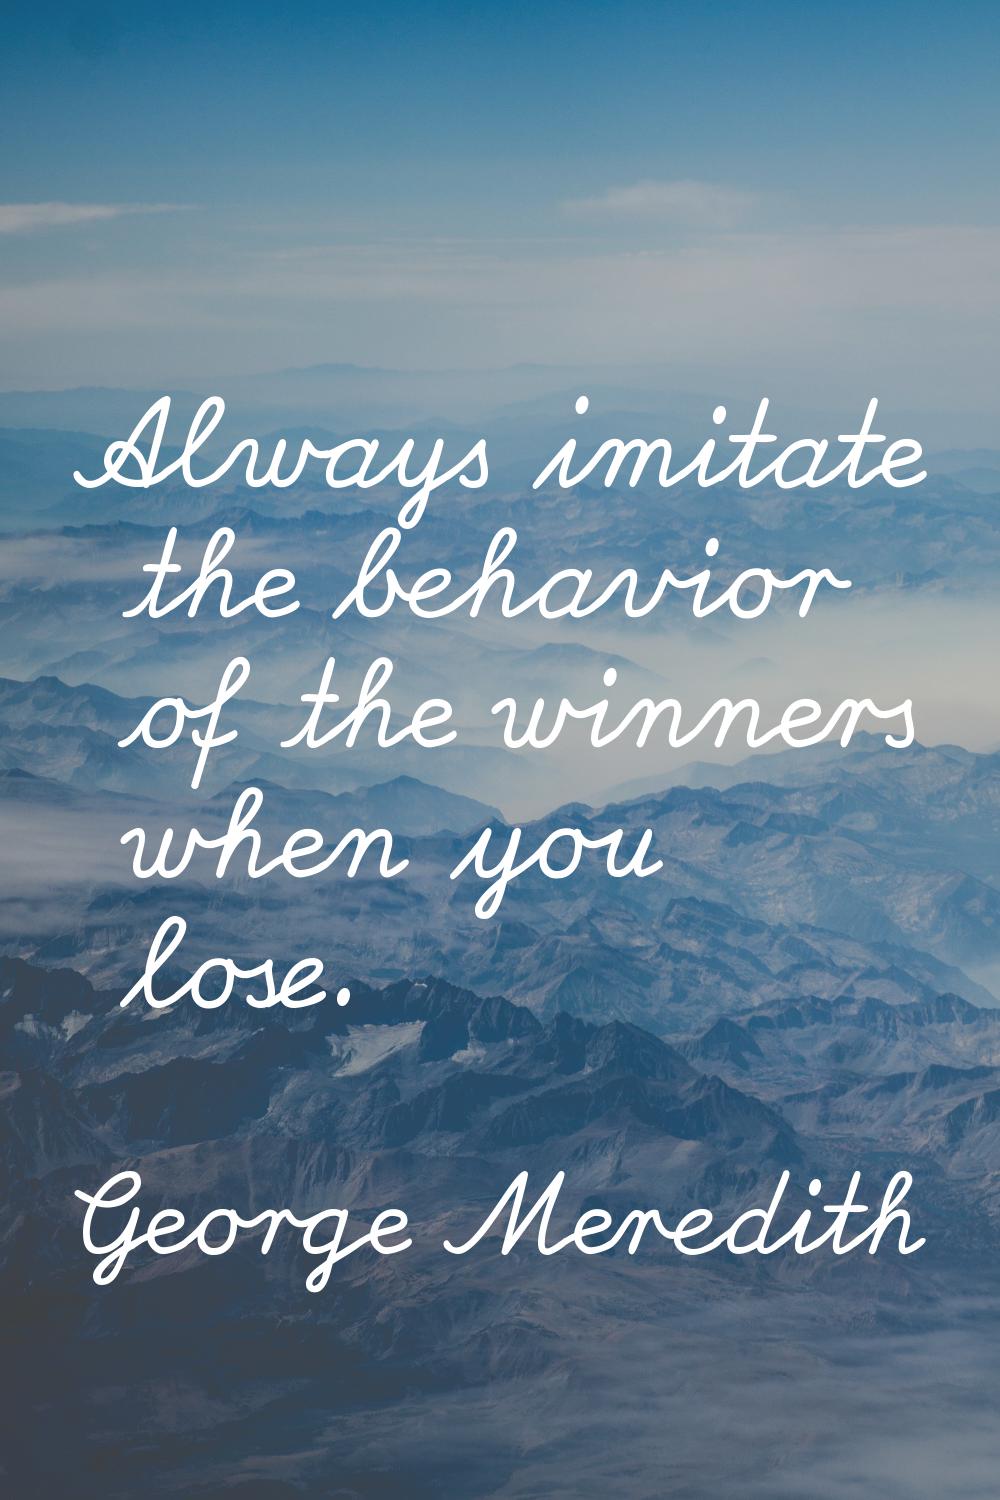 Always imitate the behavior of the winners when you lose.